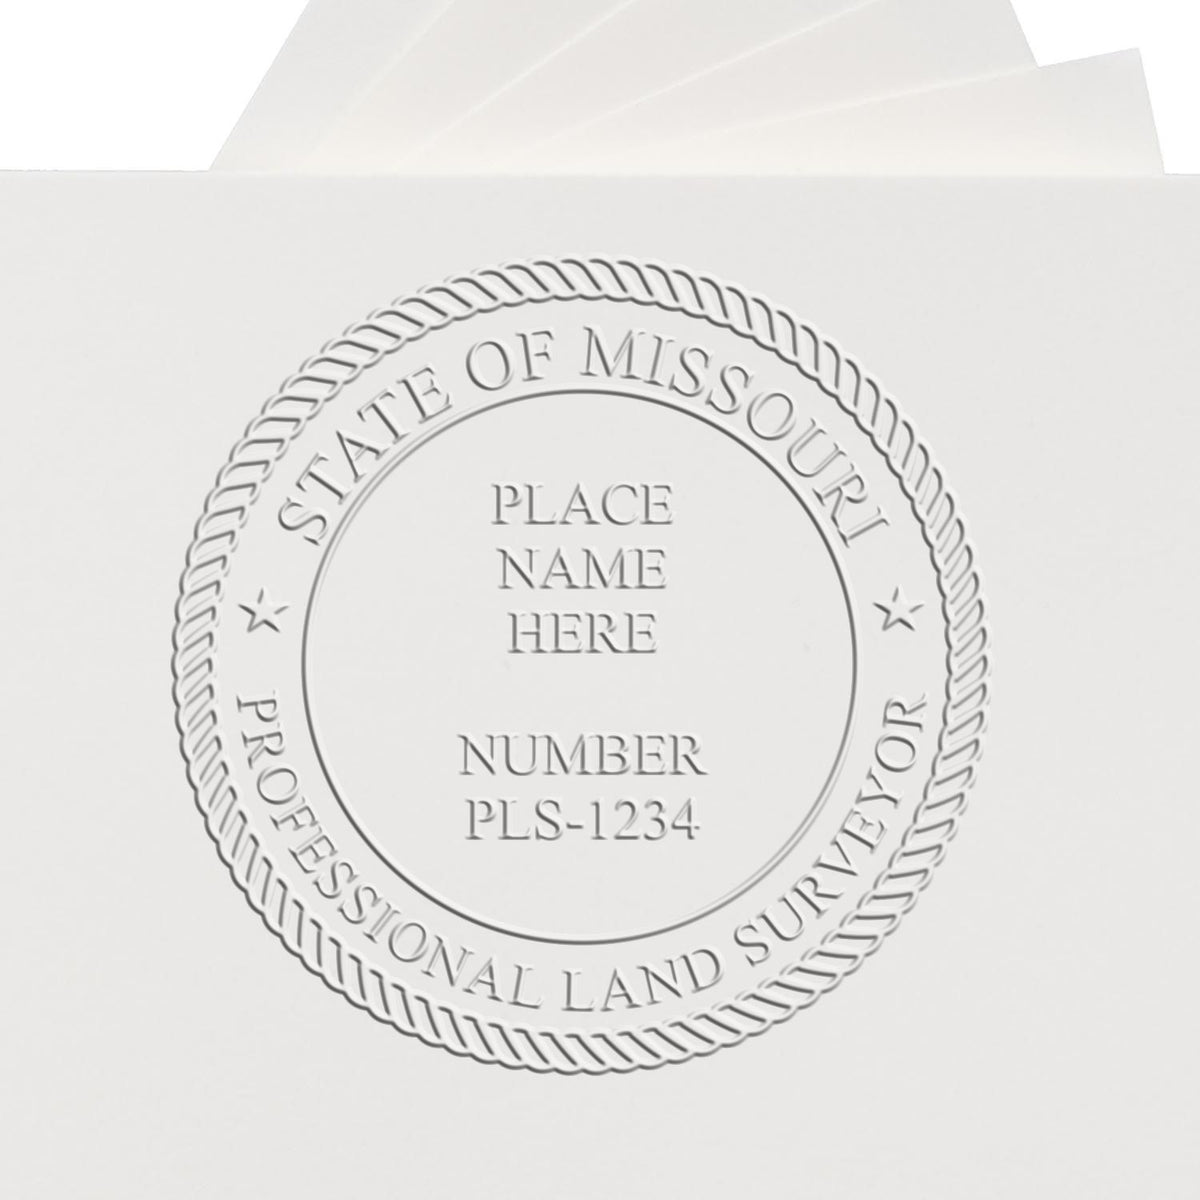 A lifestyle photo showing a stamped image of the Handheld Missouri Land Surveyor Seal on a piece of paper